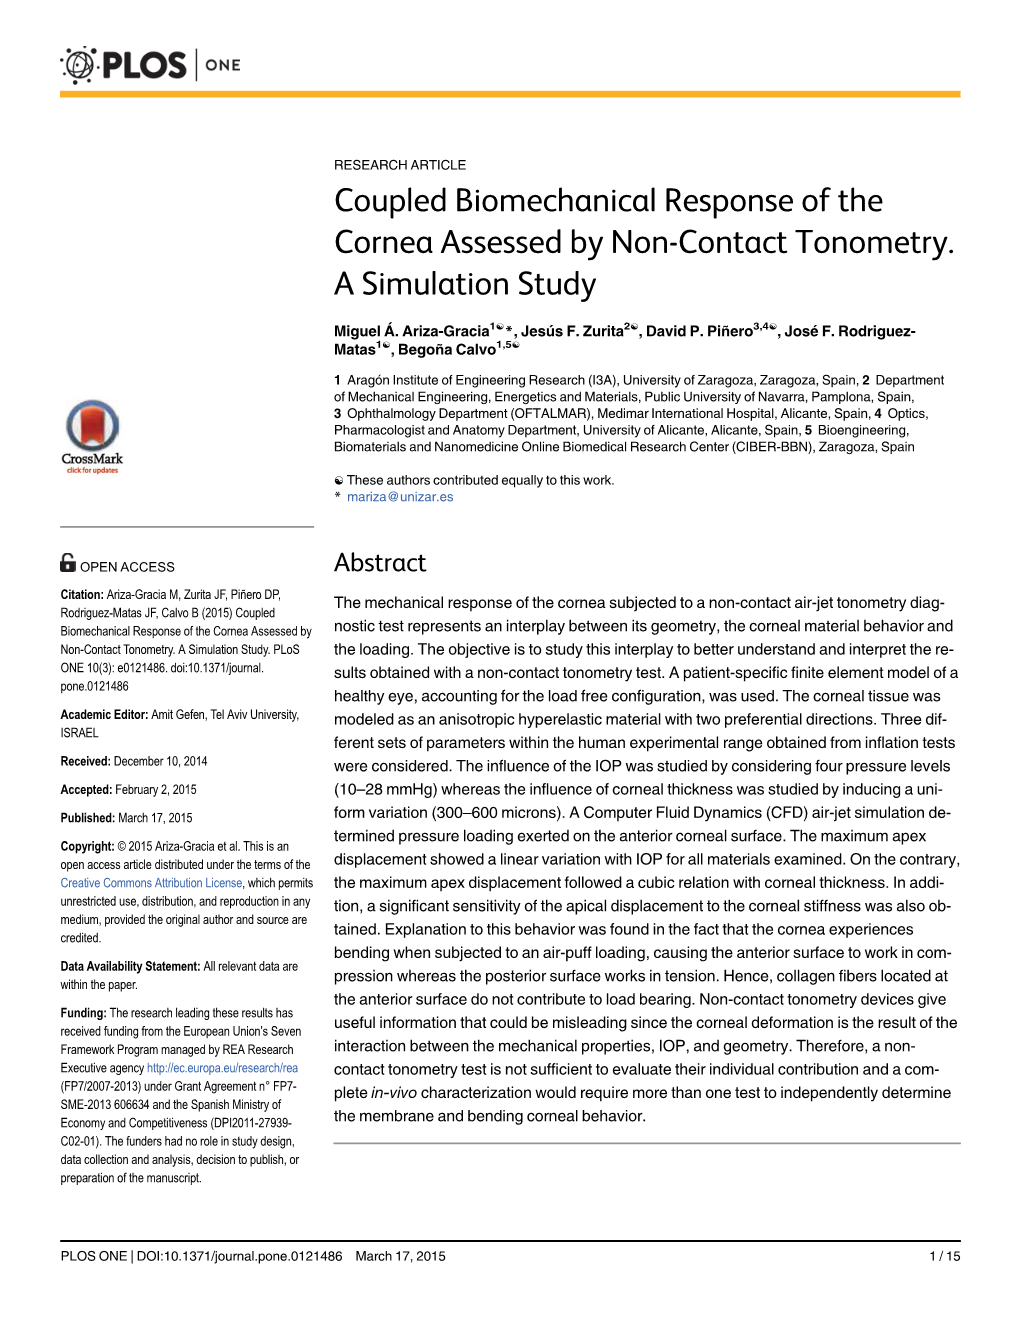 Coupled Biomechanical Response of the Cornea Assessed by Non-Contact Tonometry